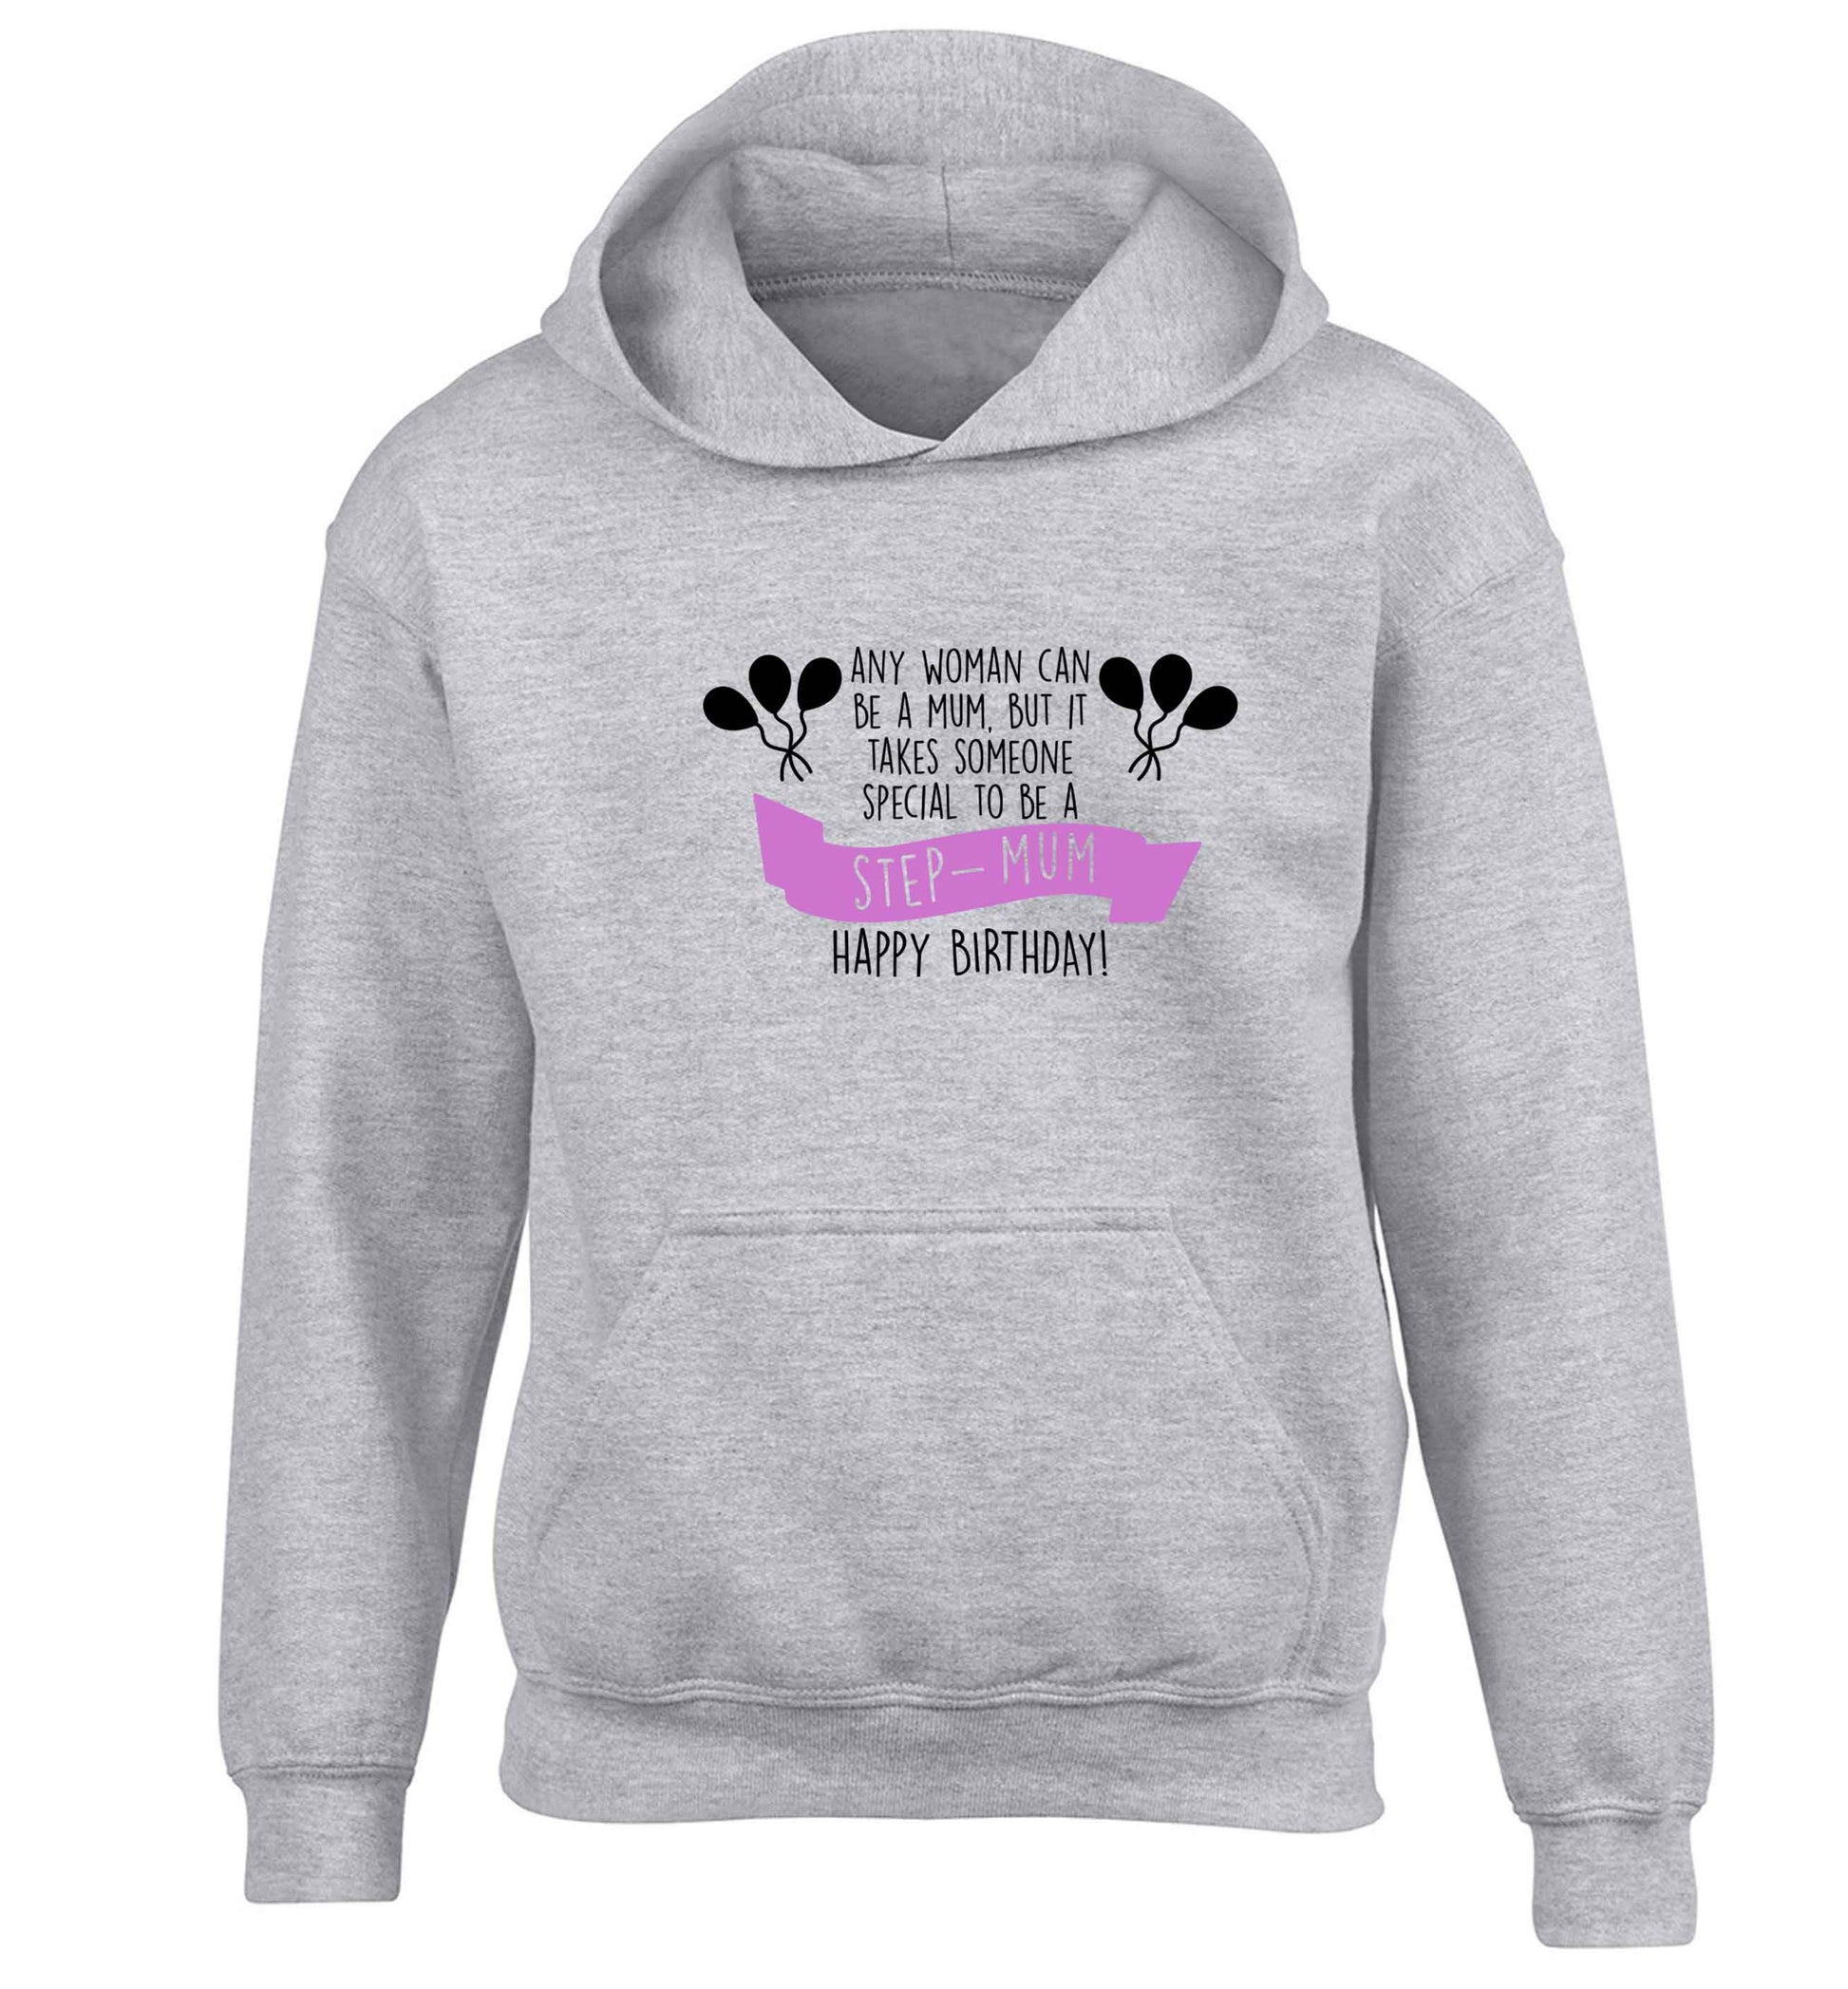 Takes someone special to be a step-mum, happy birthday! children's grey hoodie 12-13 Years